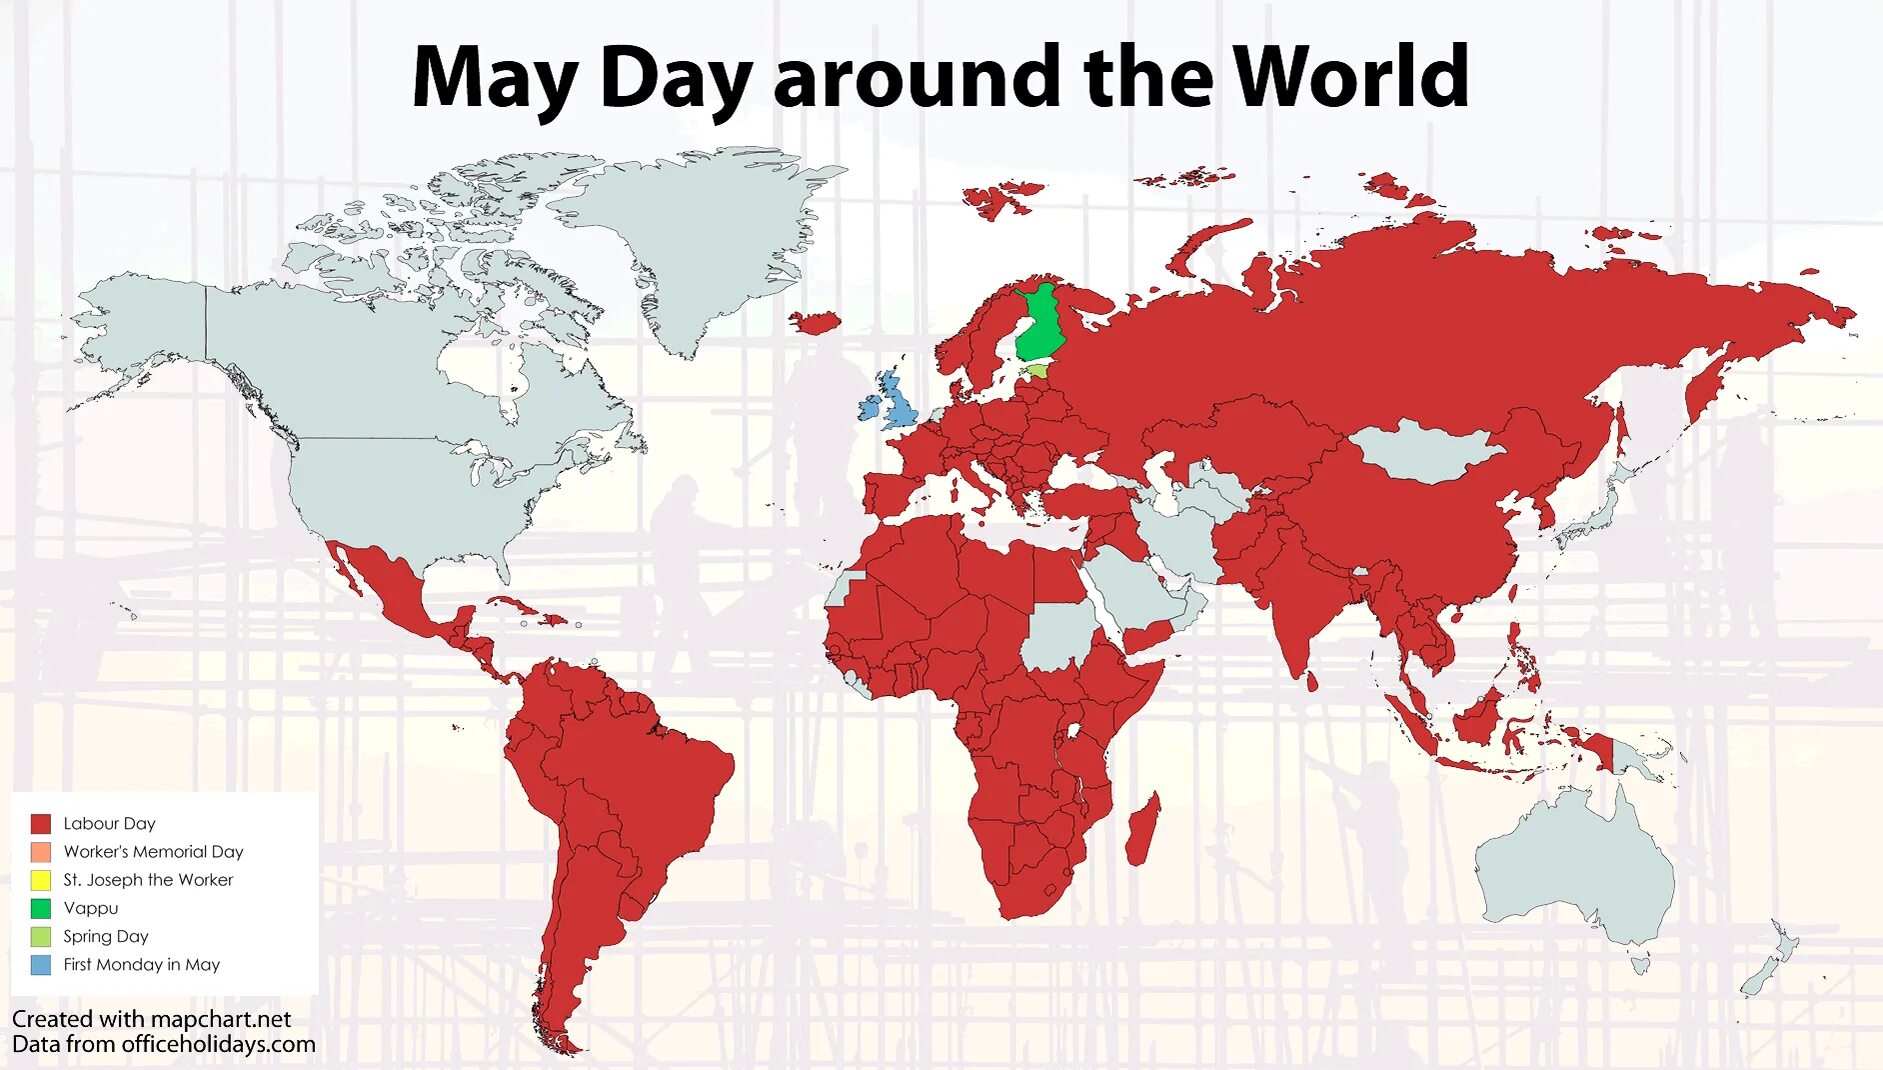 1 May International Day. International Labour Day 1 May. Labor Day on May 1. Workers around the World.